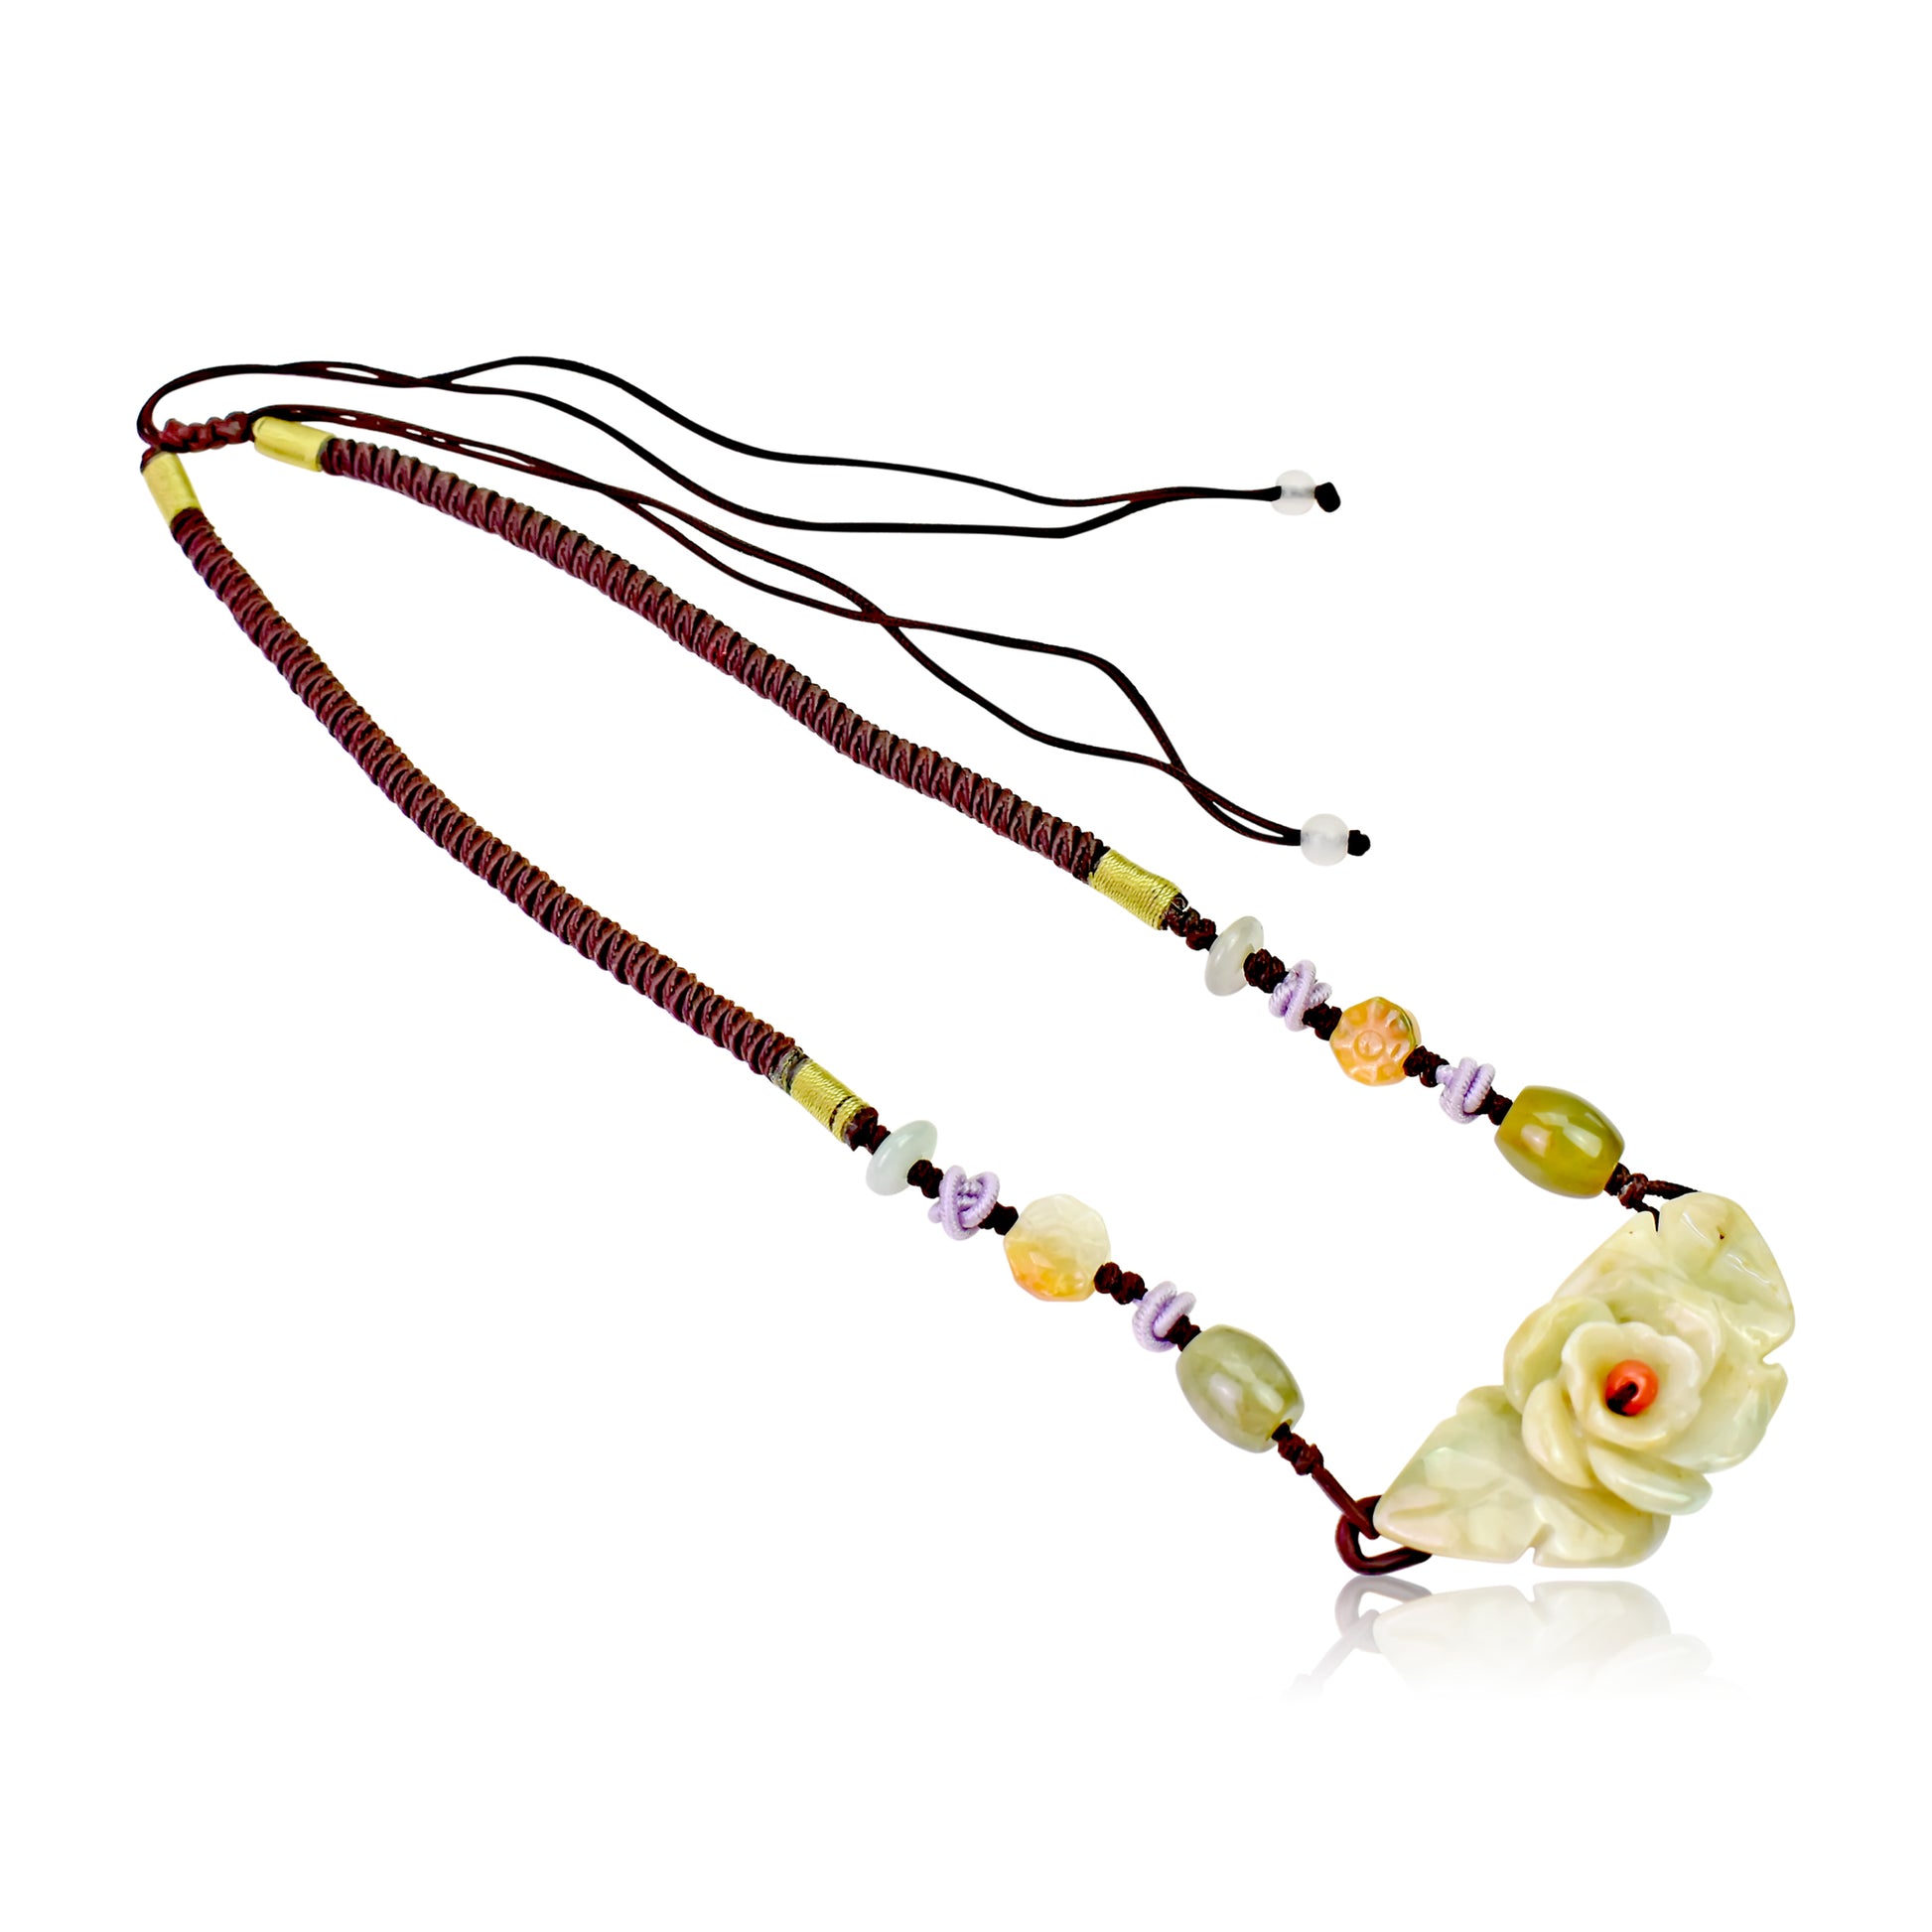 Get Your Love Story Started with Rose Jade Necklace made with Brown Cord